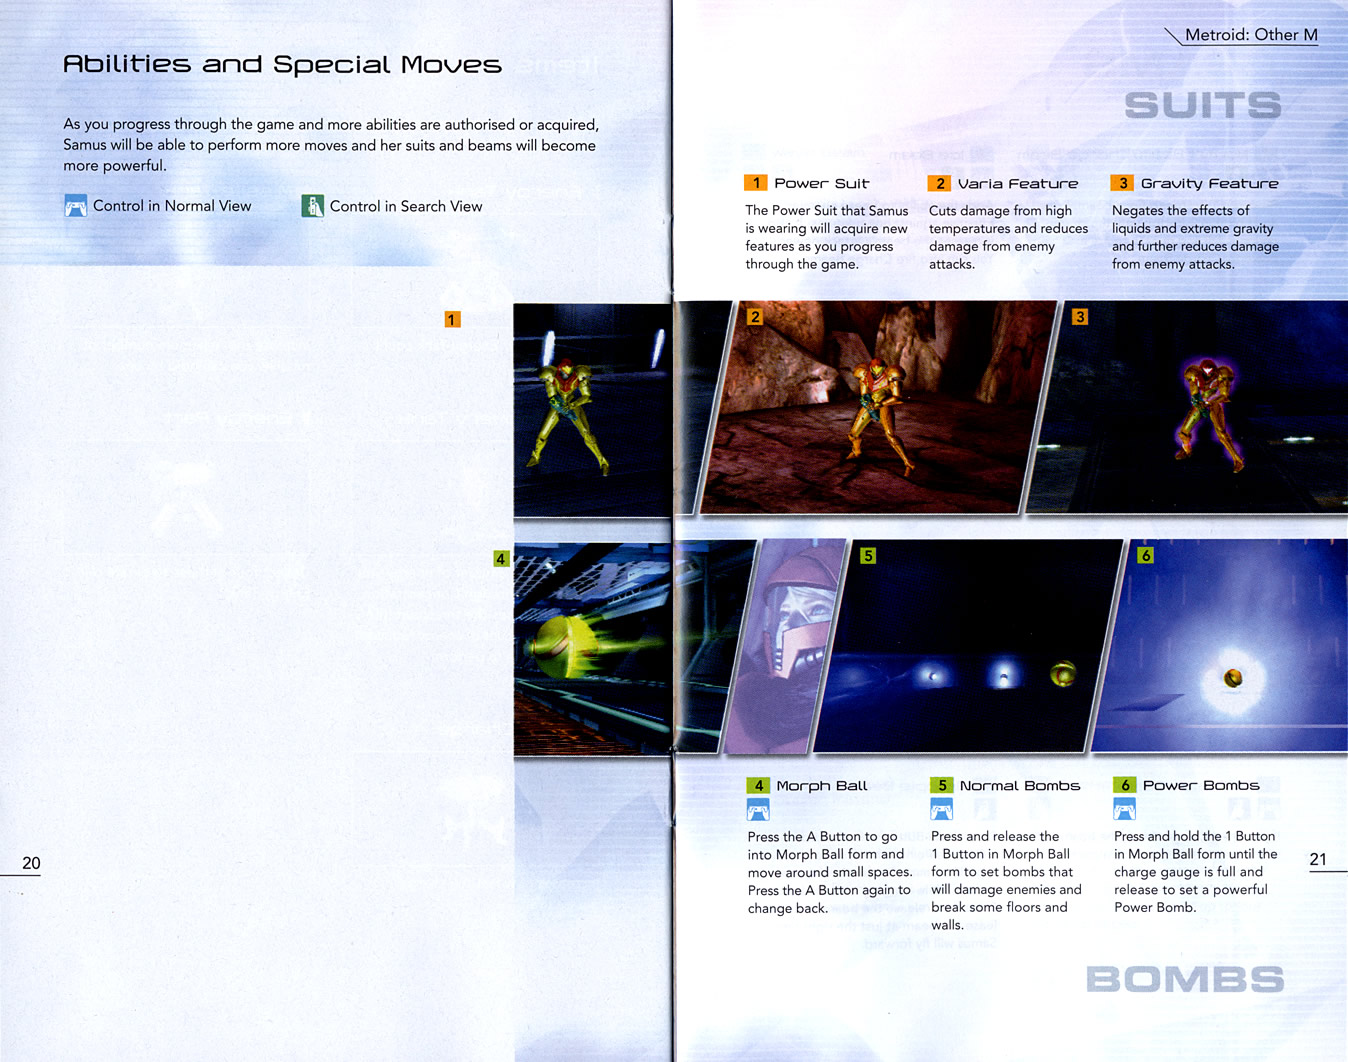 Metroid: Other M instruction manual